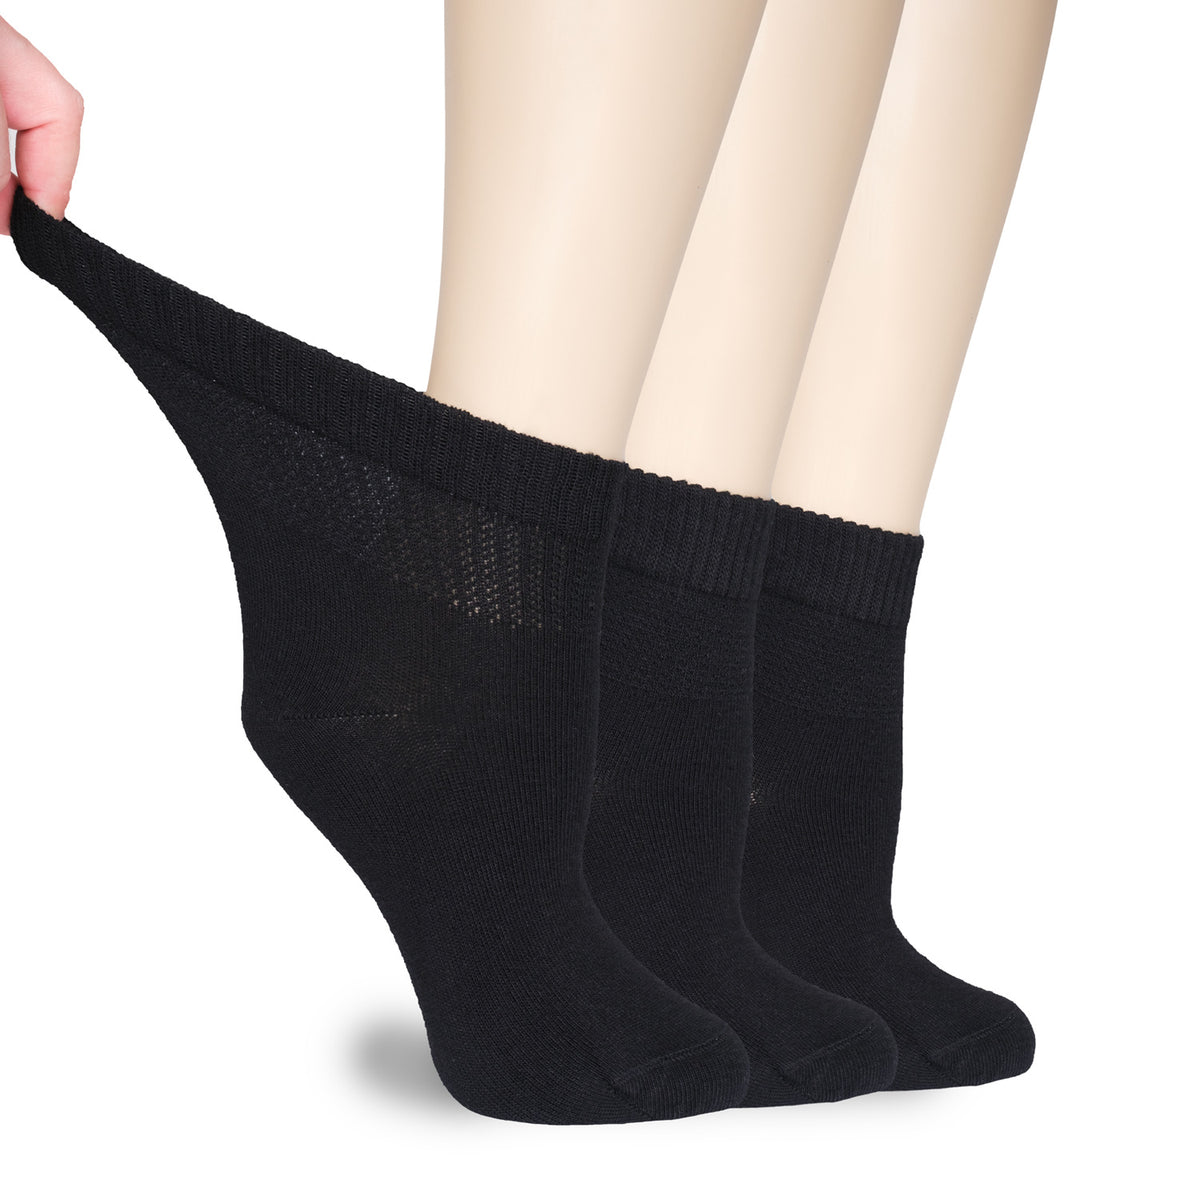 A black Women's Diabetic Bamboo Ankle Socks, perfect for women's feet. The socks are made of bamboo material, which is gentle on sensitive skin.